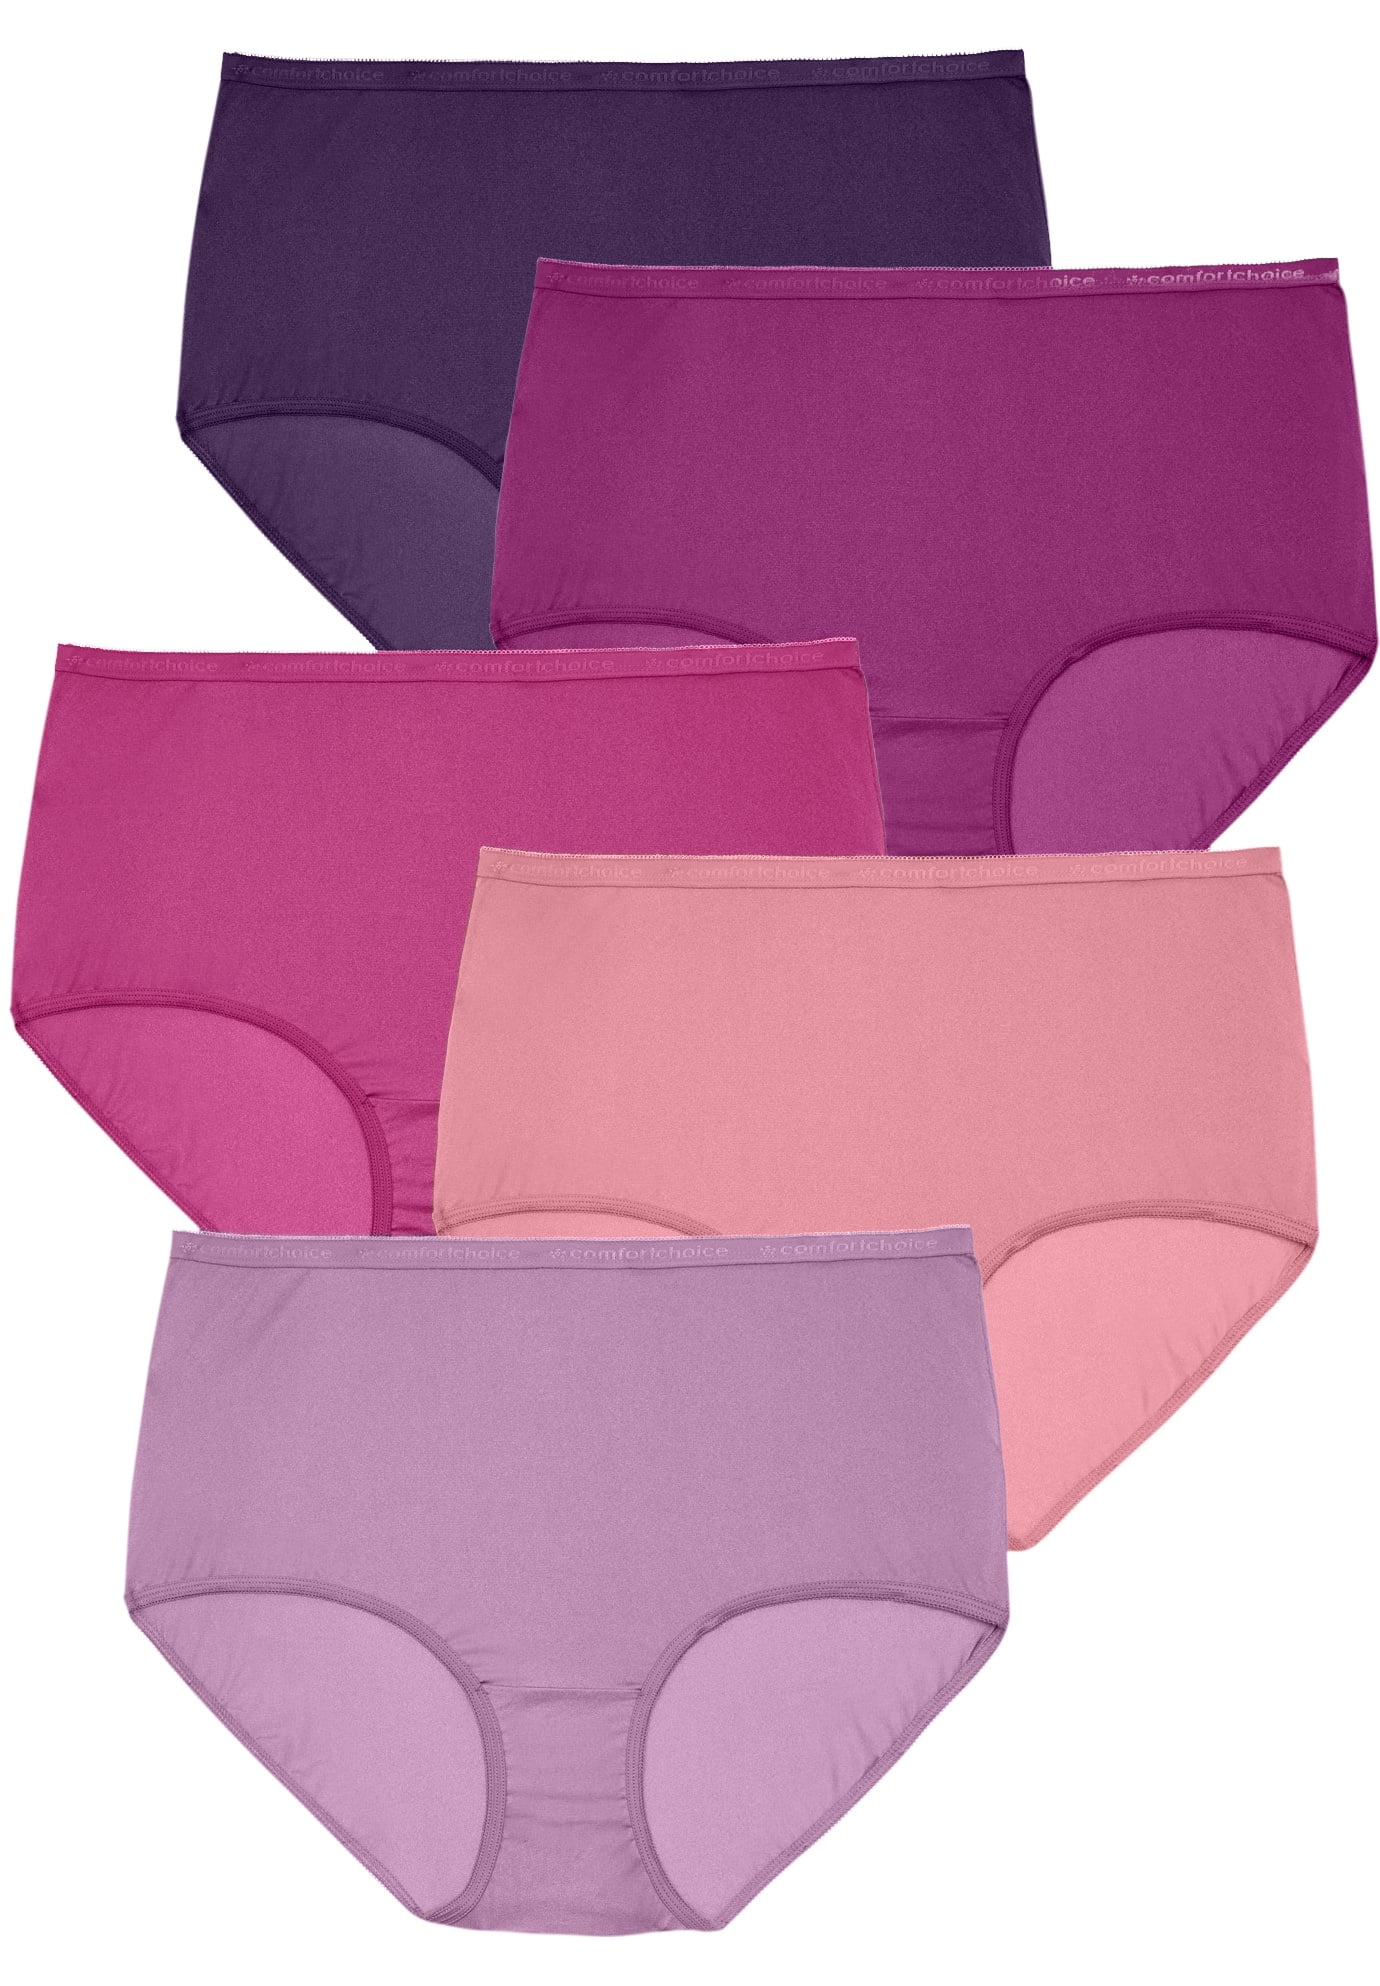 Women's High Waisted Underwear Soft Breathable Panties Stretch Full Briefs Multipack Regular & Plus Size 4/5-Pack 